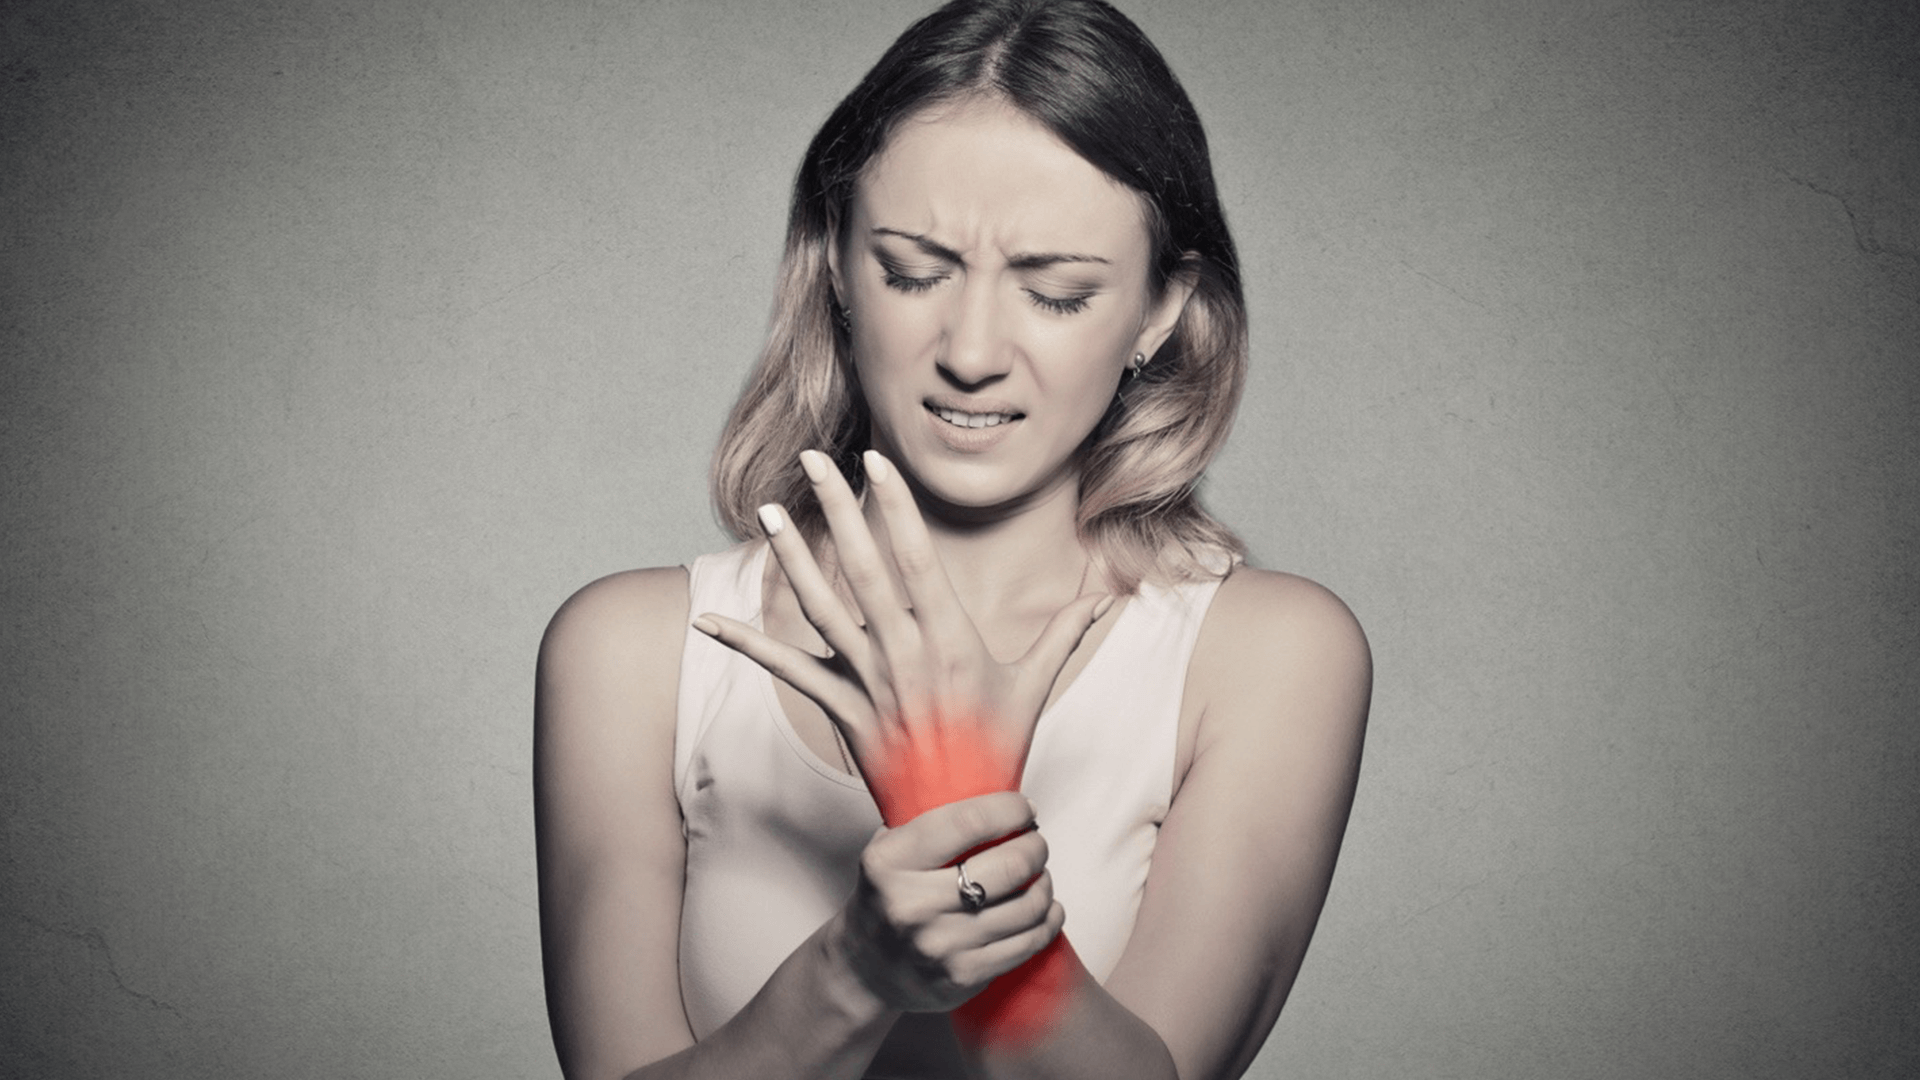 Treatments for carpal tunnel syndrome